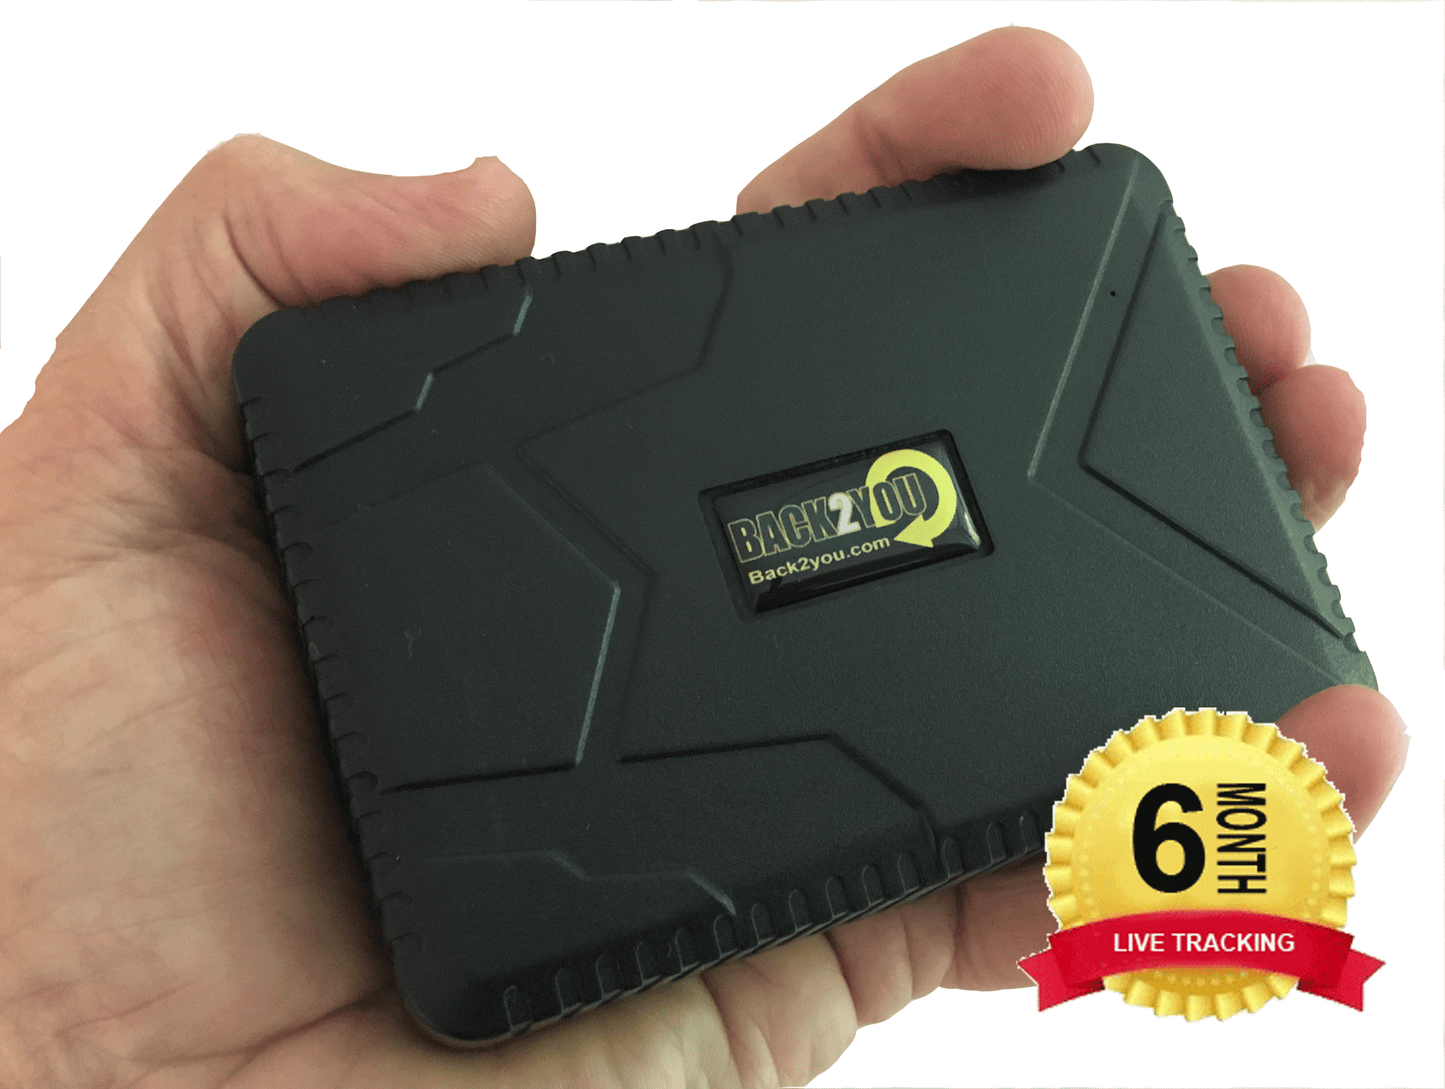 Guardian Extra GPS Tracker Self Contained - 30 Days FREE Live Tracking - 4 Month Battery - Set Up Ready To Track